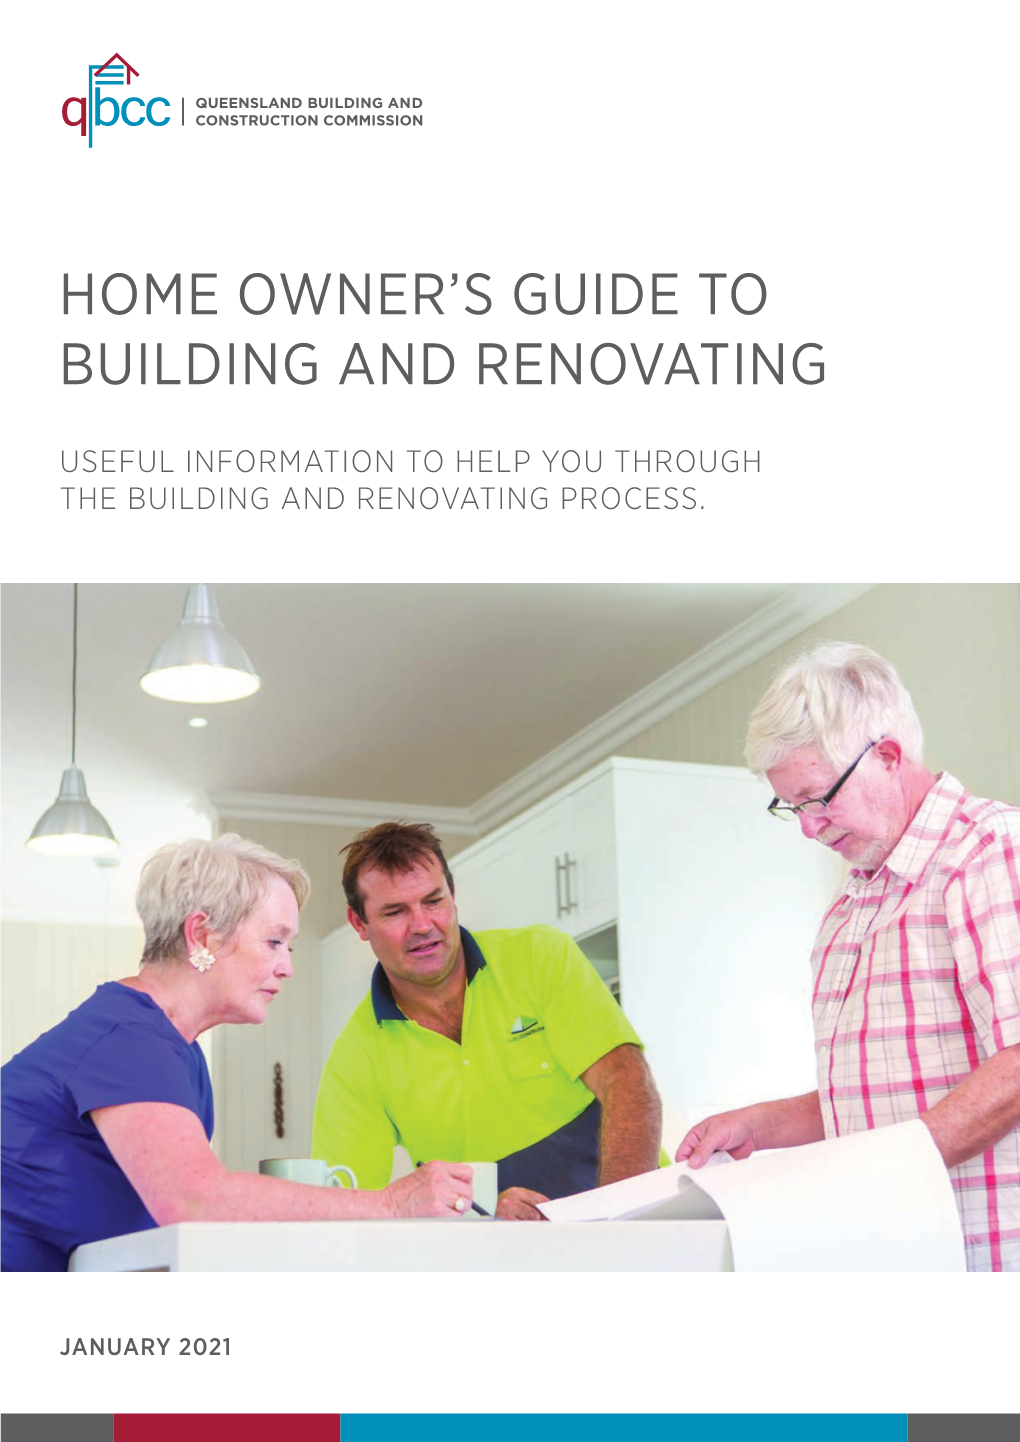 QBCC Home Owner's Guide to Building and Renovating